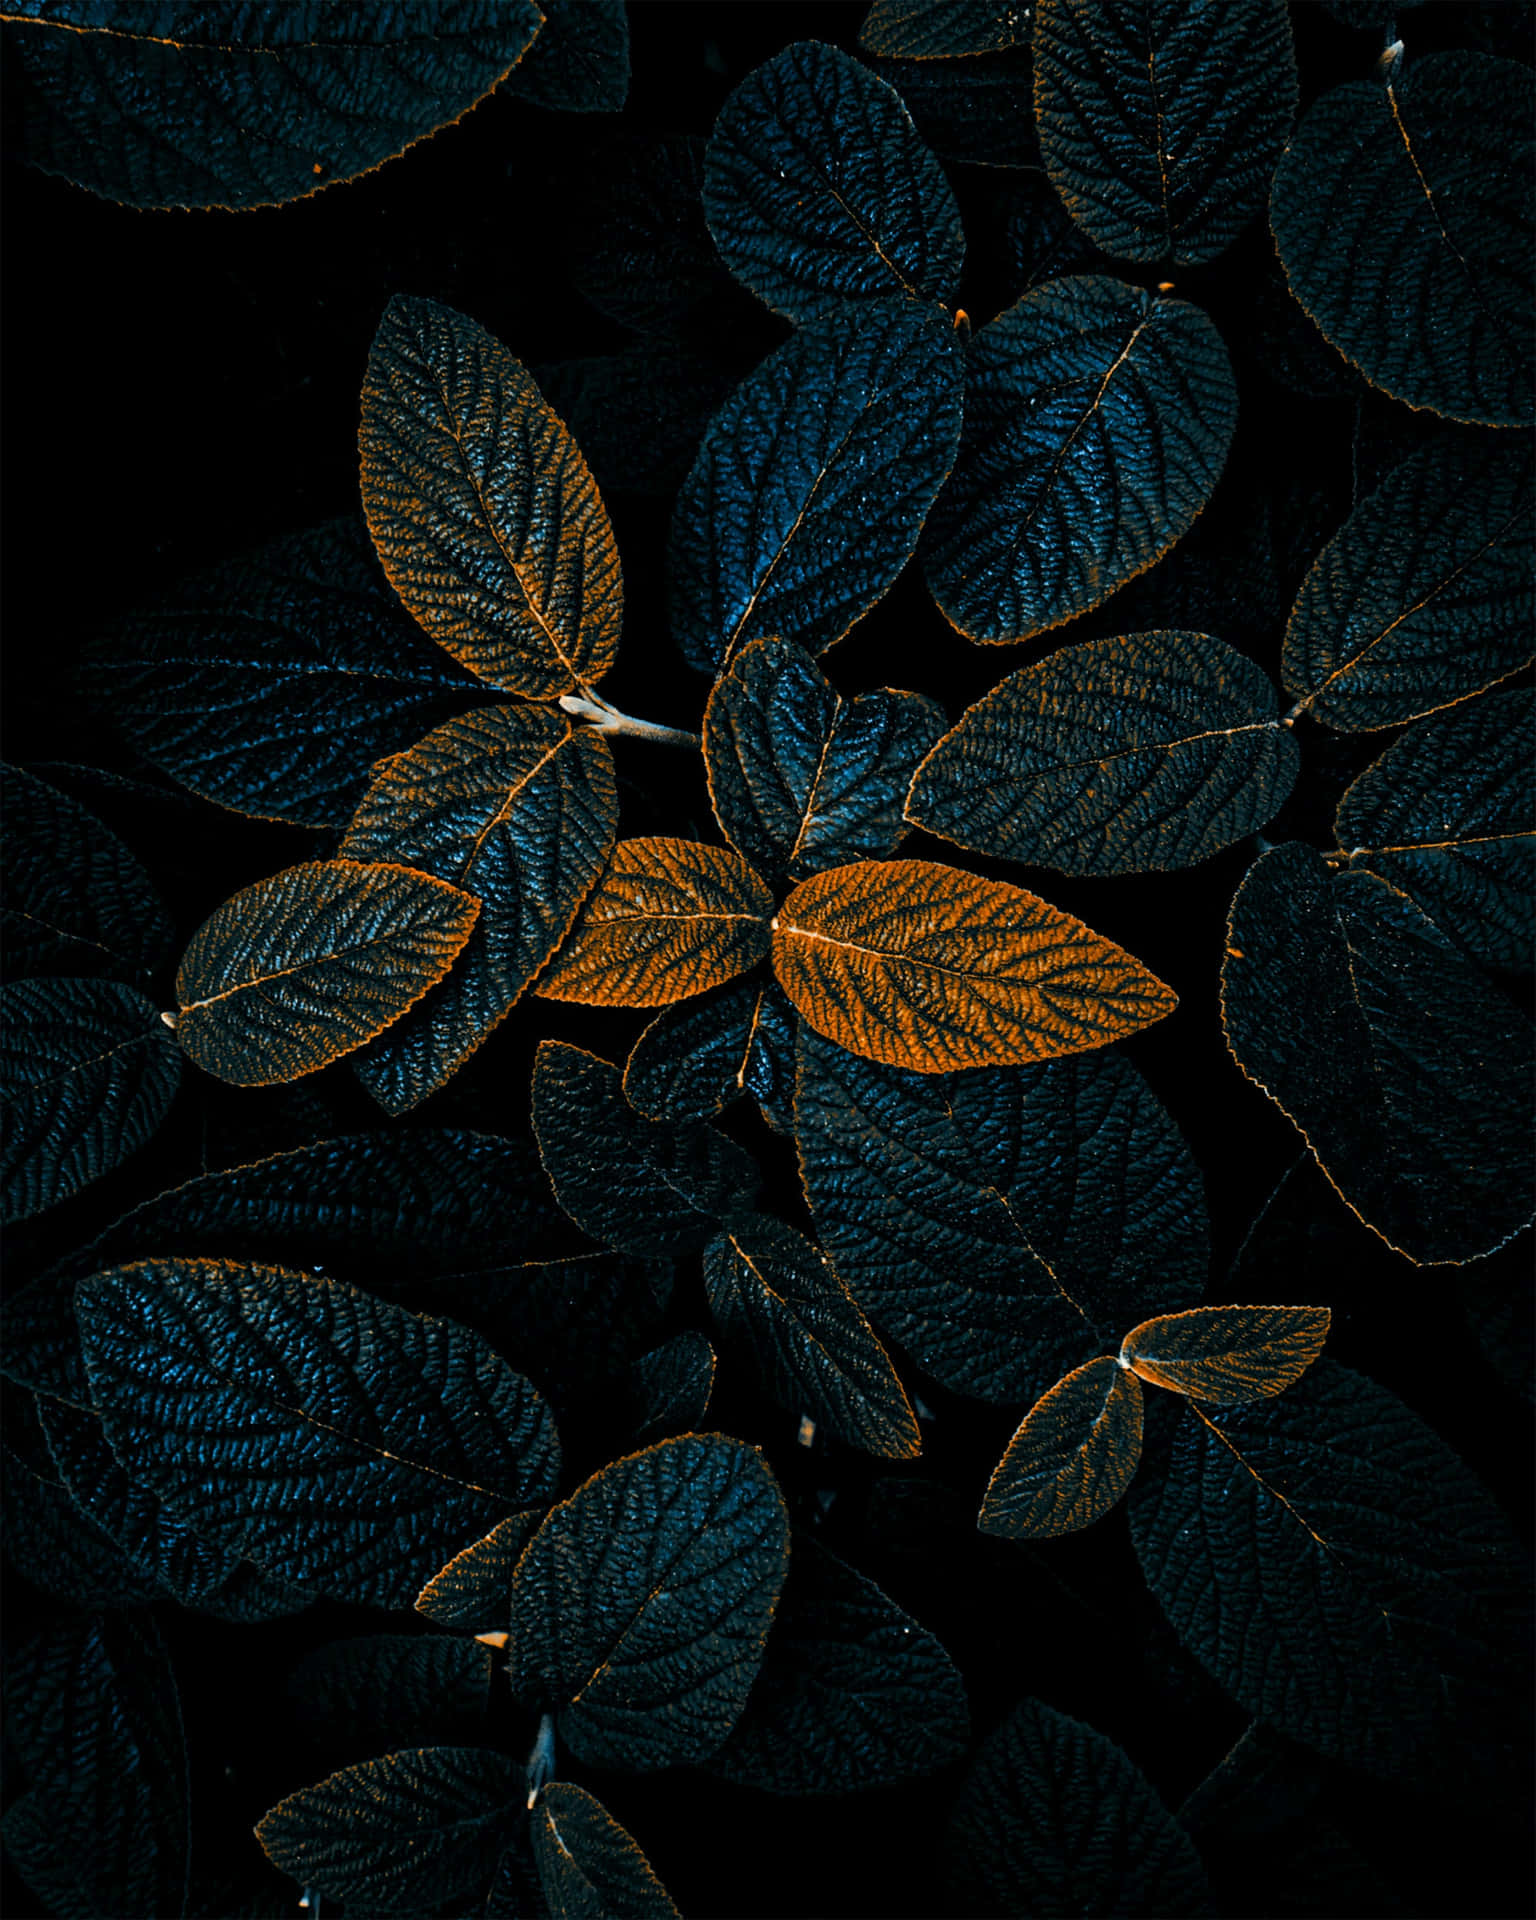 Handy Photograph Of The Leaves Wallpaper